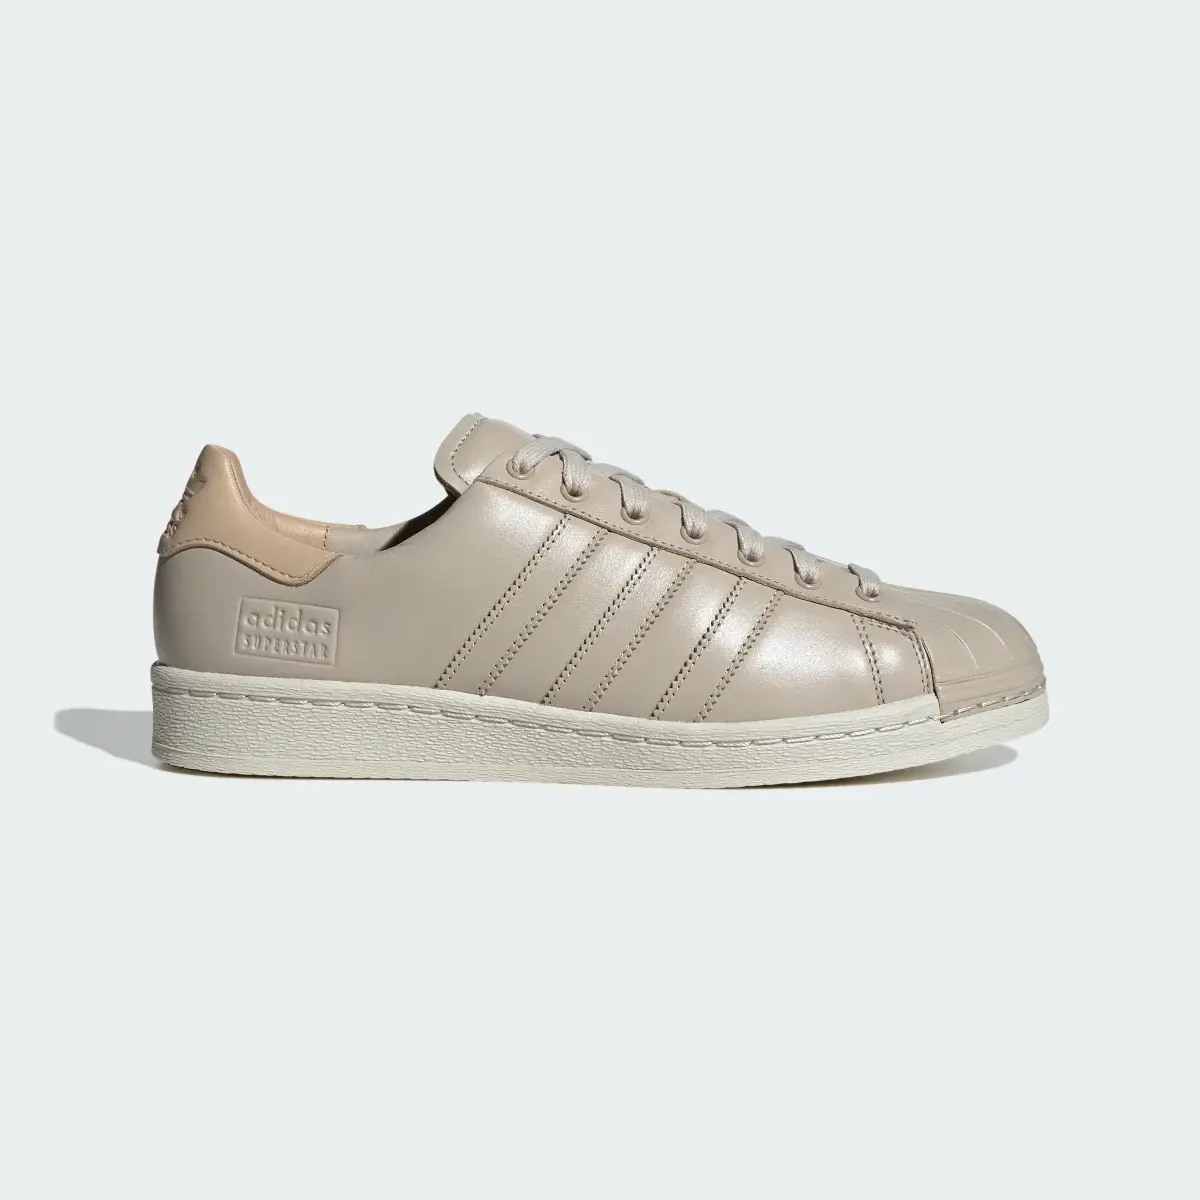 Adidas Superstar Lux Shoes. 2